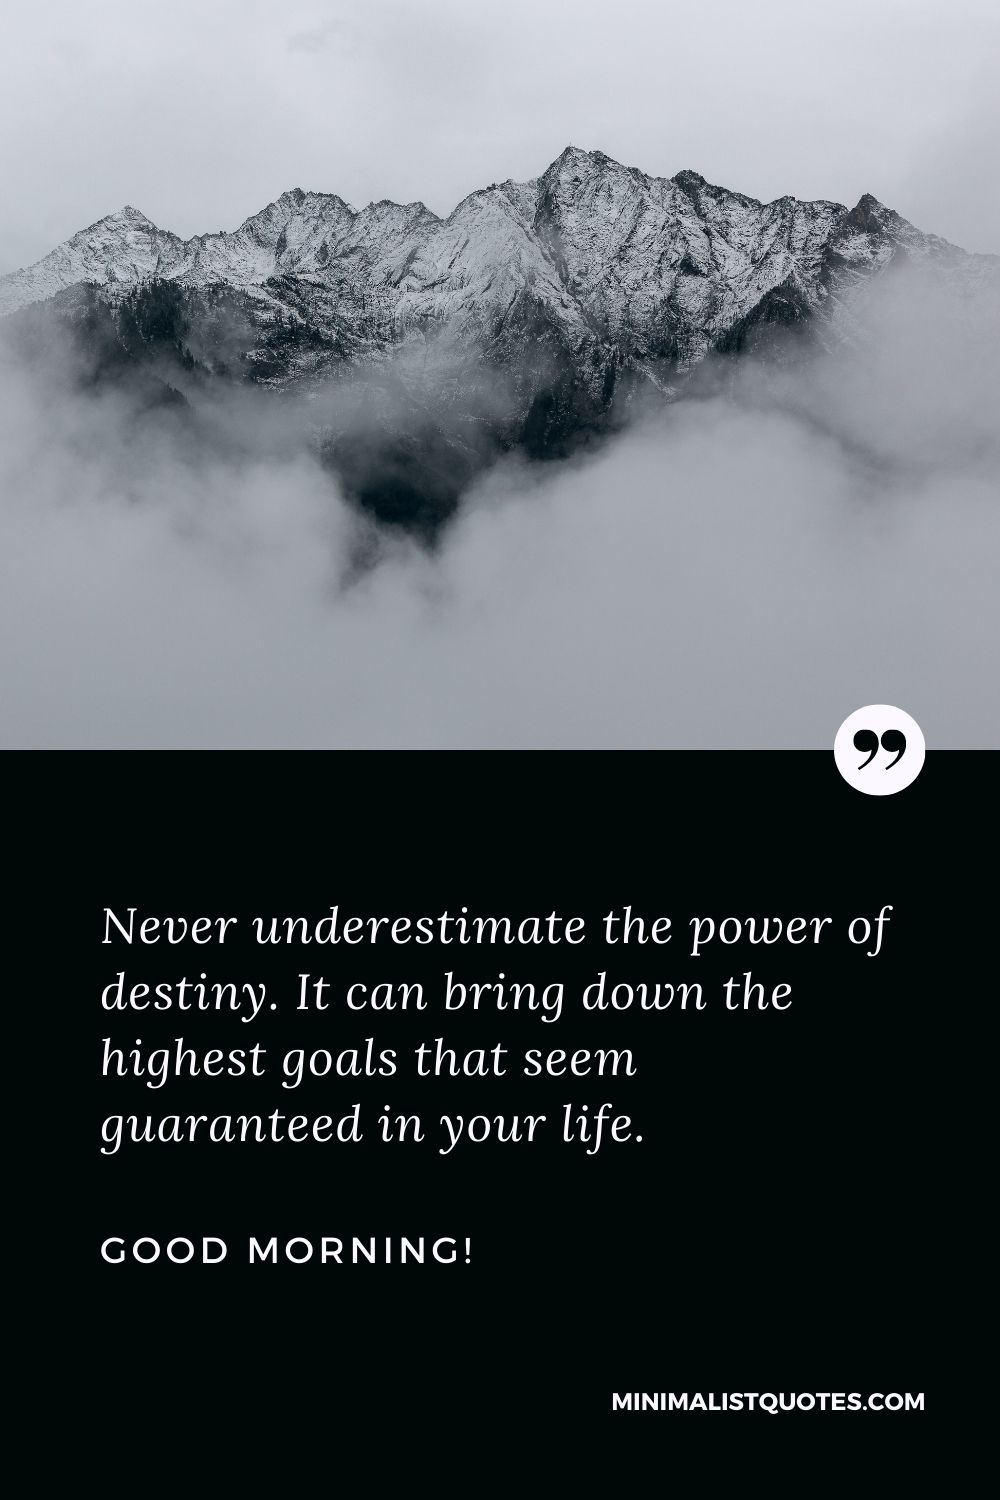 Motivational good morning wishes: Never underestimate the power of destiny. It can bring down the highest goals that seem guaranteed in your life. Good Morning!